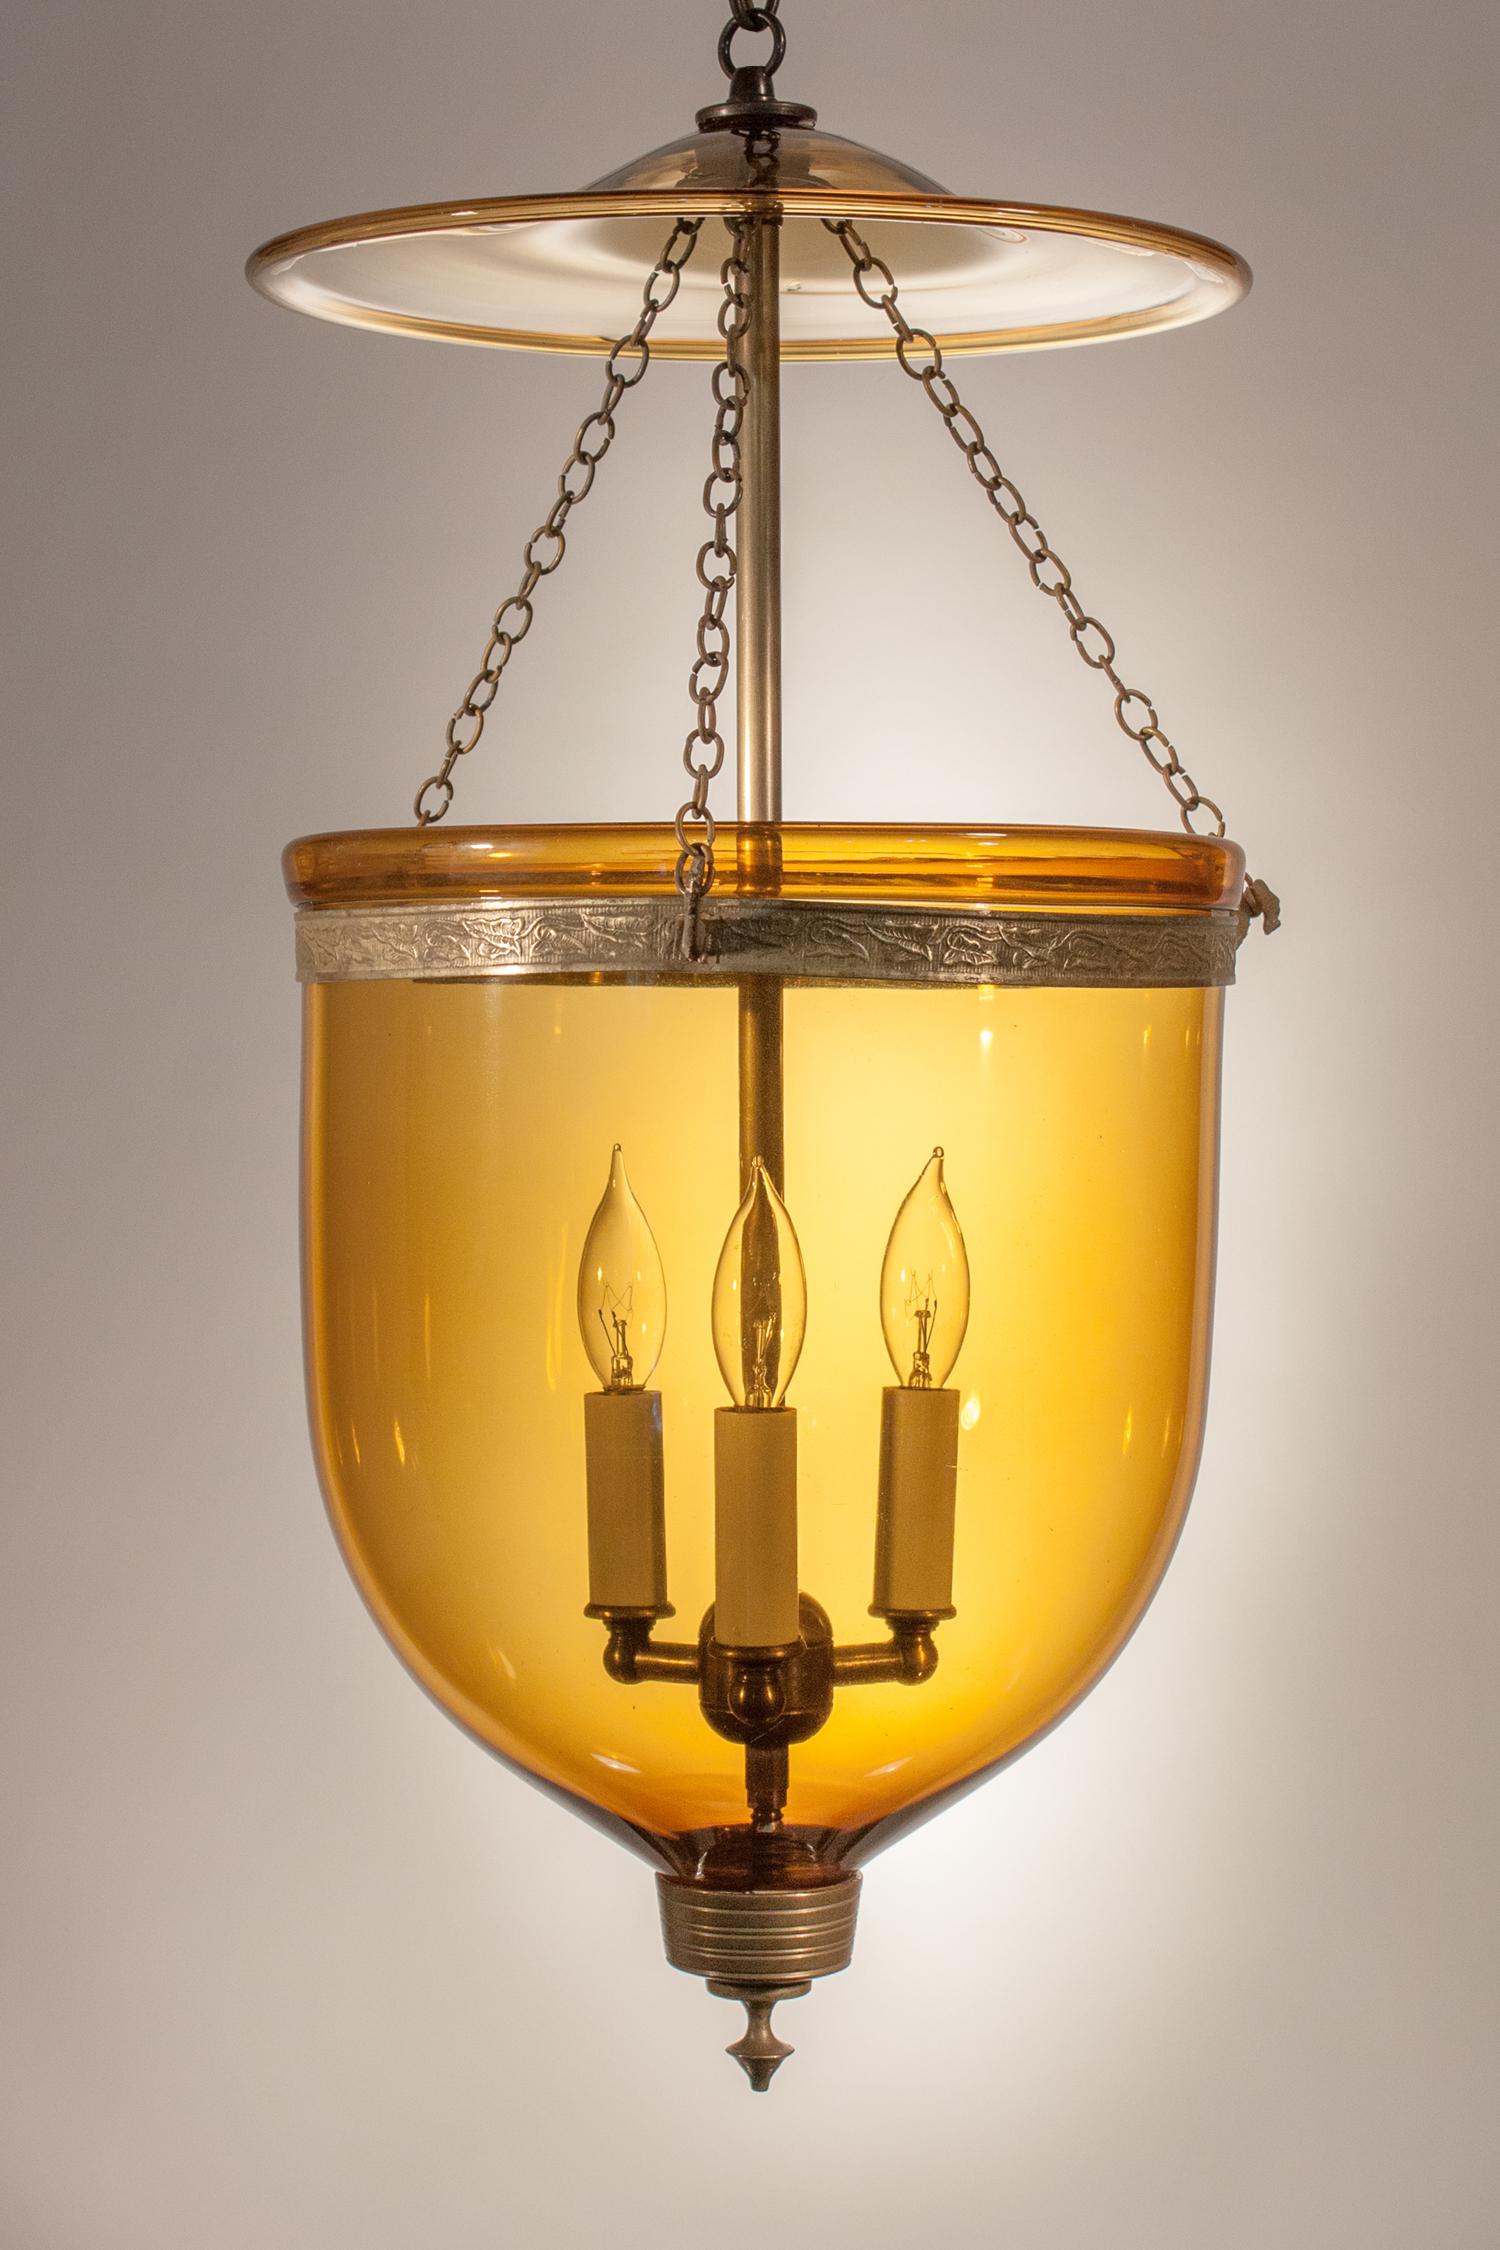 High Victorian Antique Bell Jar Lantern with Amber Colored Glass